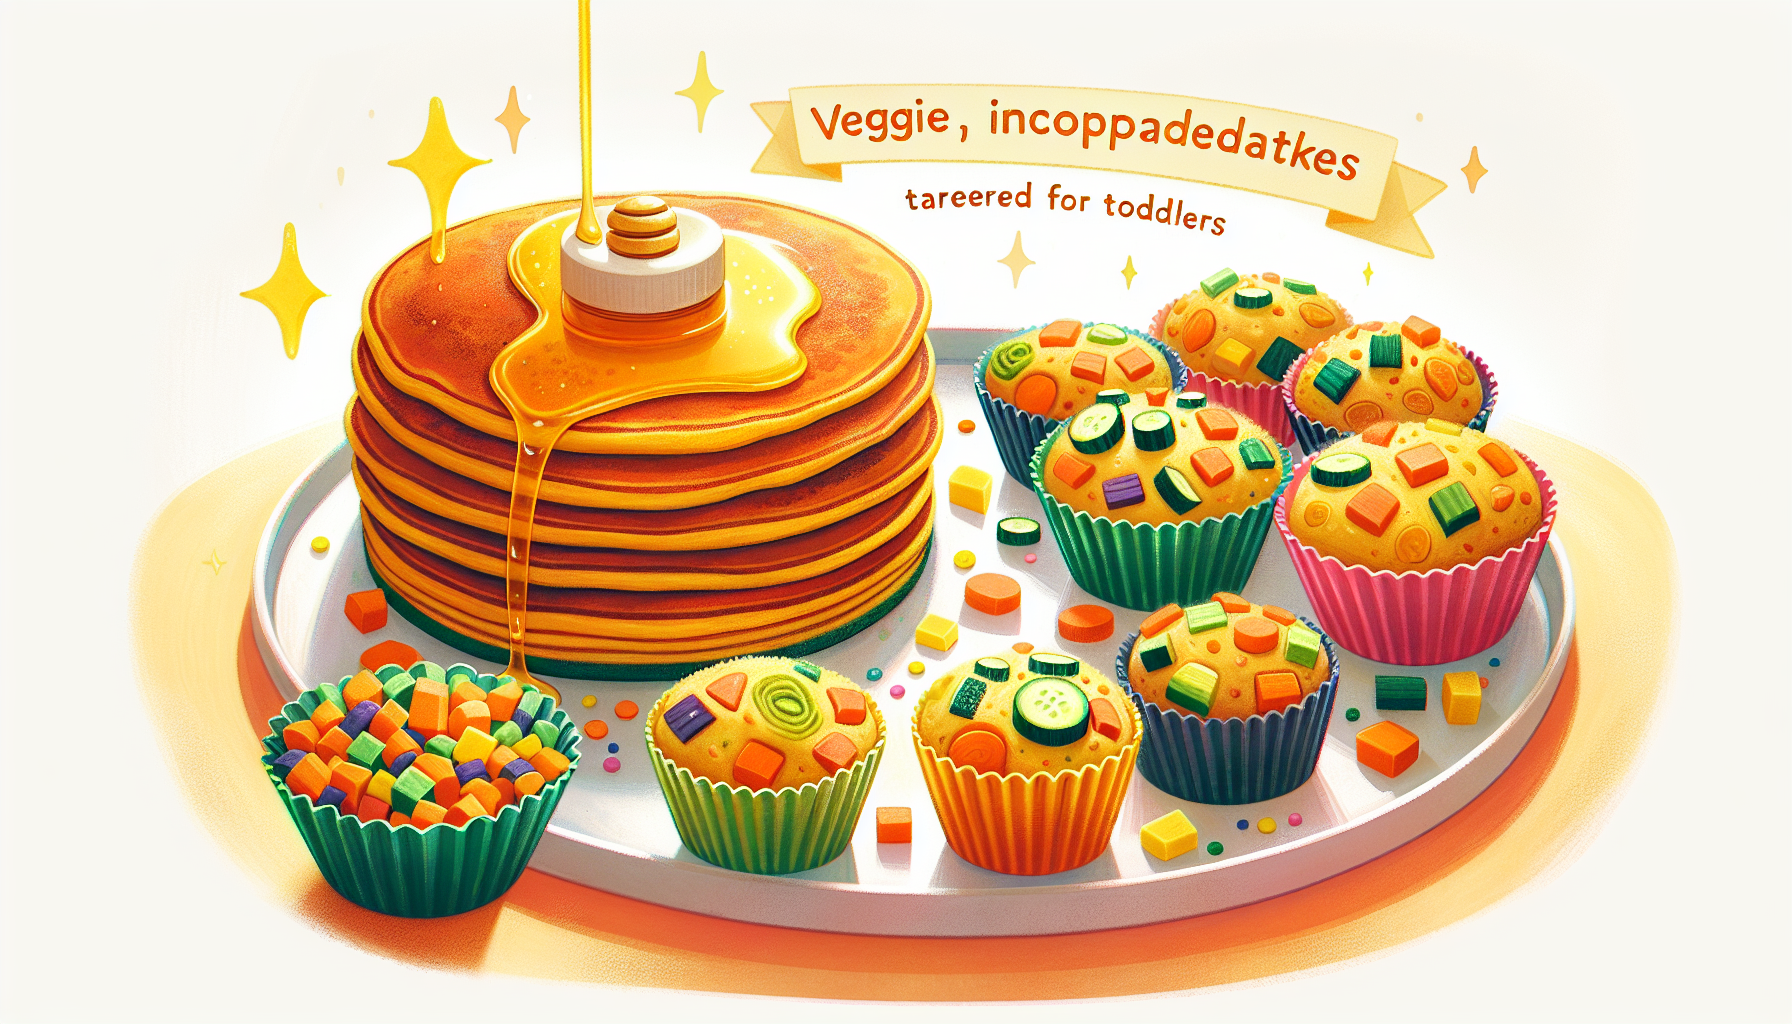 Veggie-incorporated breakfast ideas for toddlers